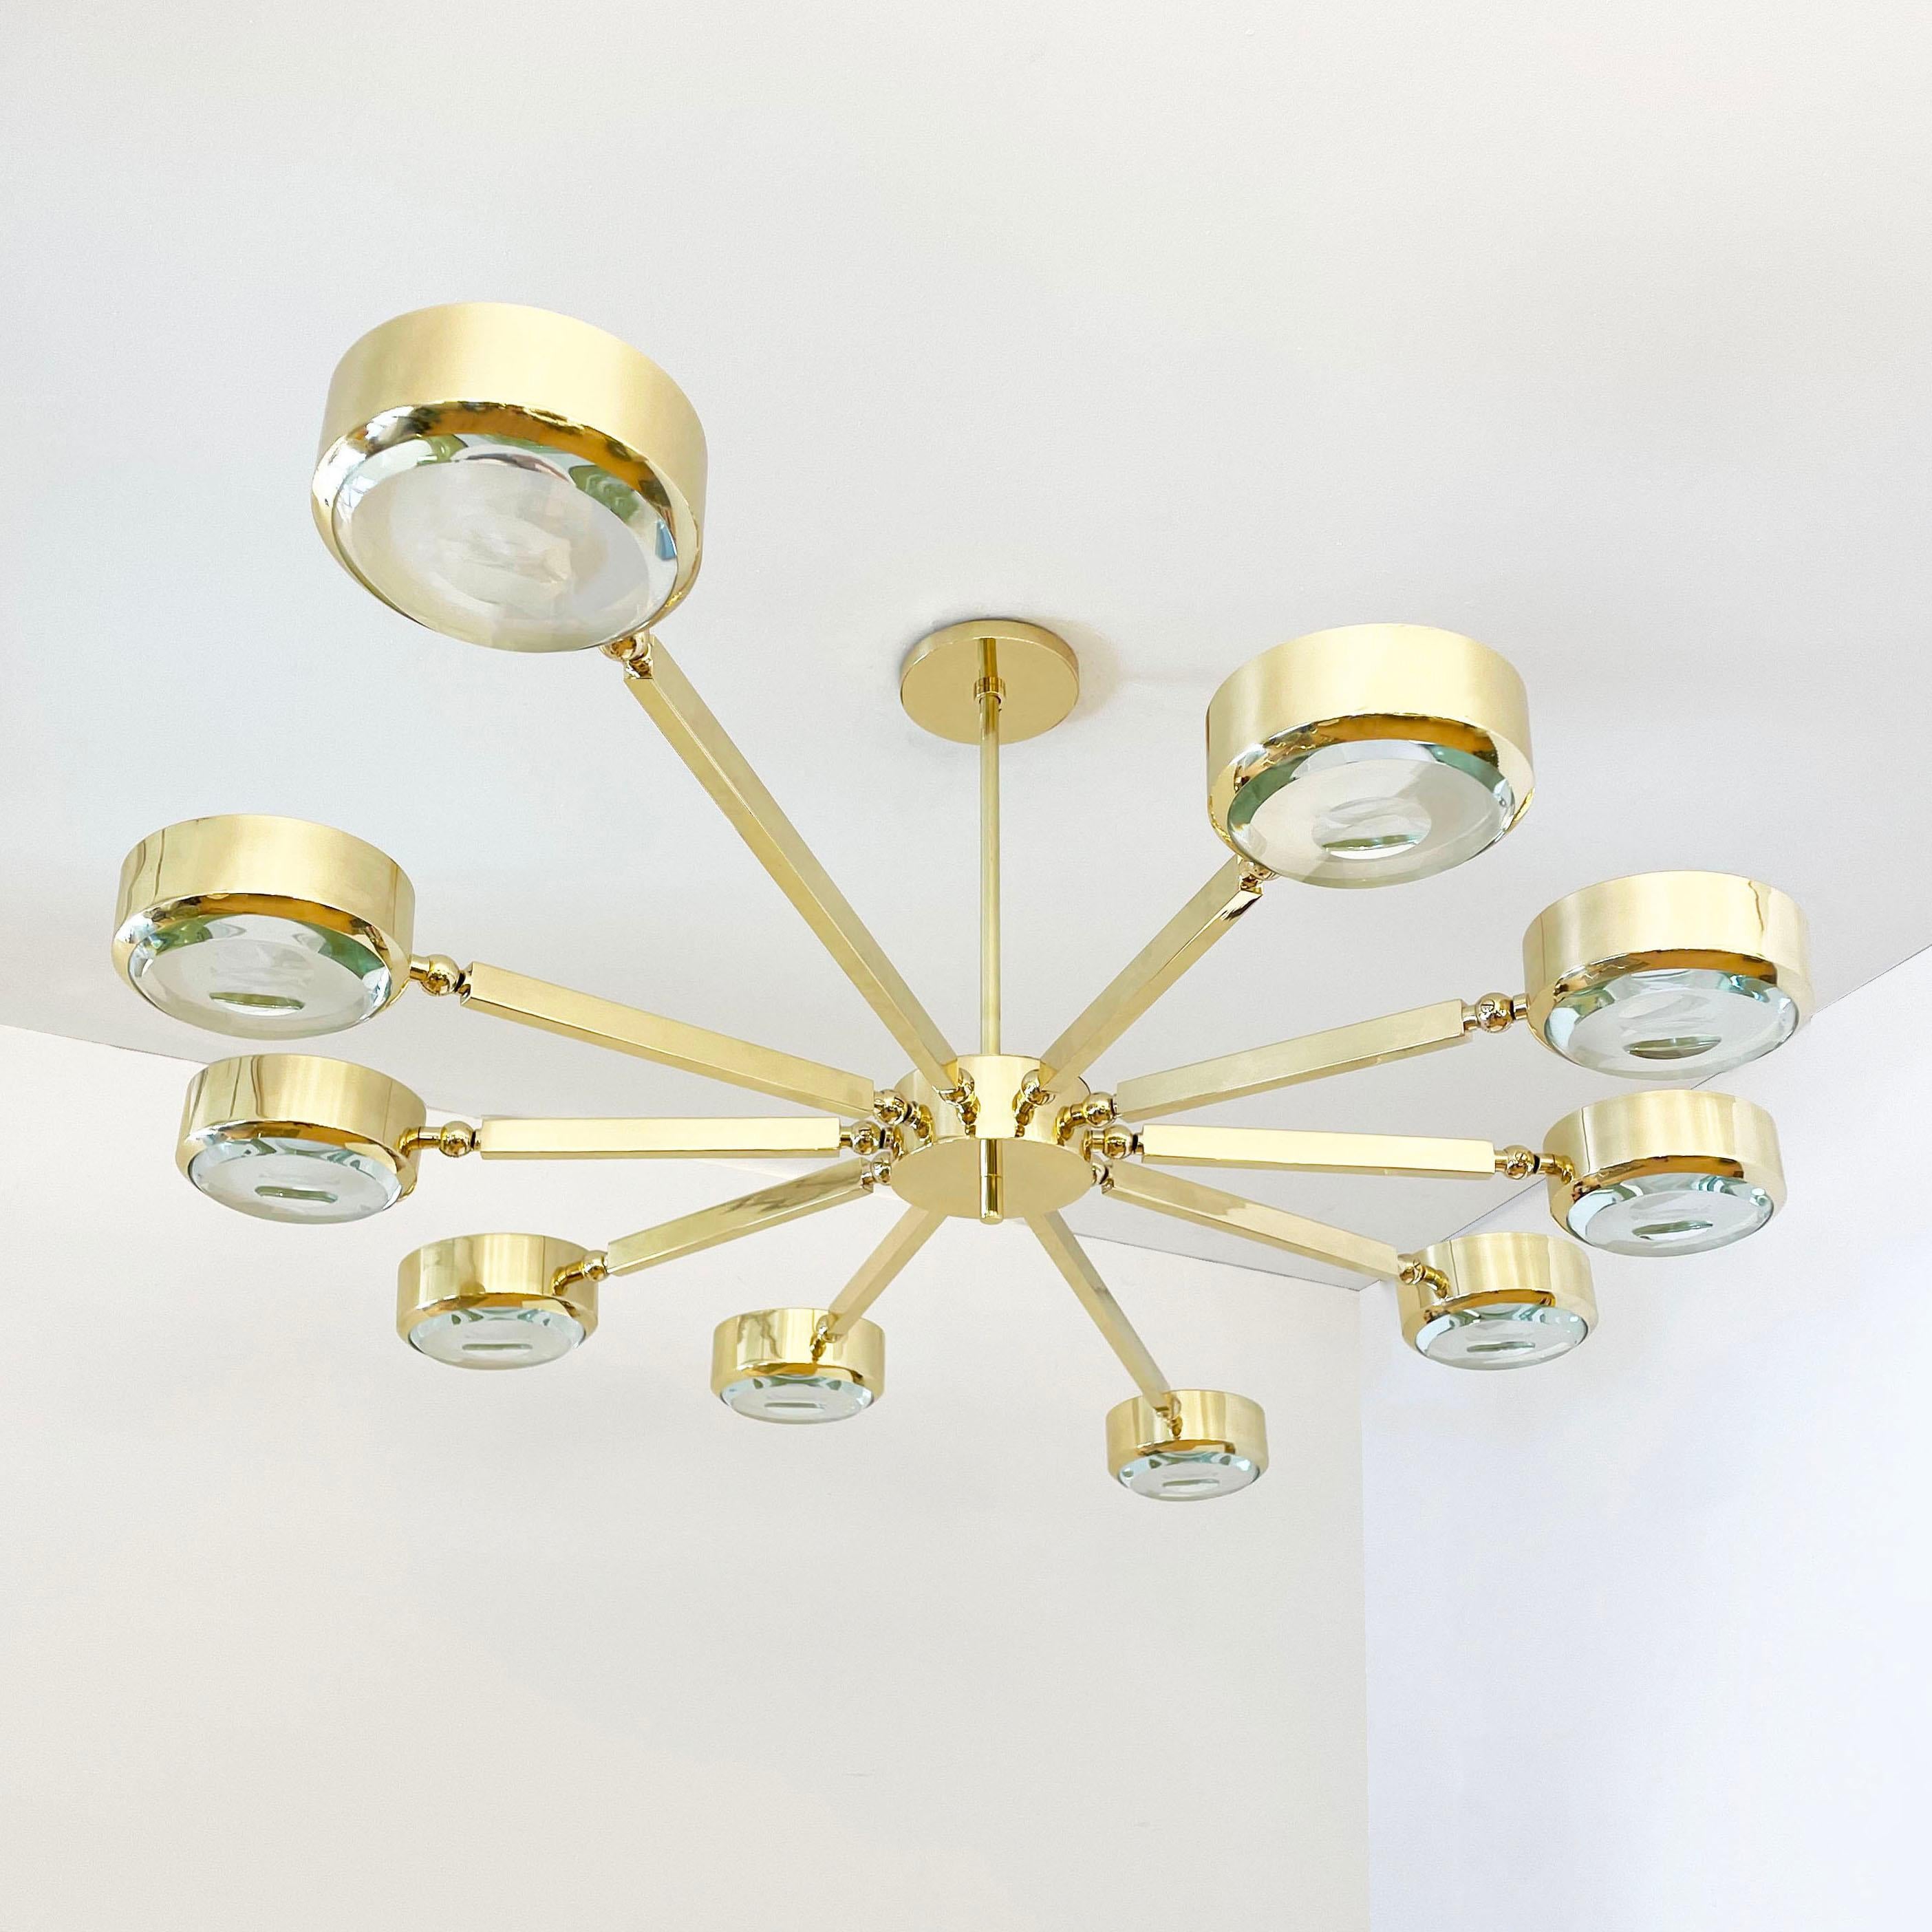 Oculus Oval Ceiling Light by Gaspare Asaro- Polished Nickel with Carved Glass In New Condition For Sale In New York, NY